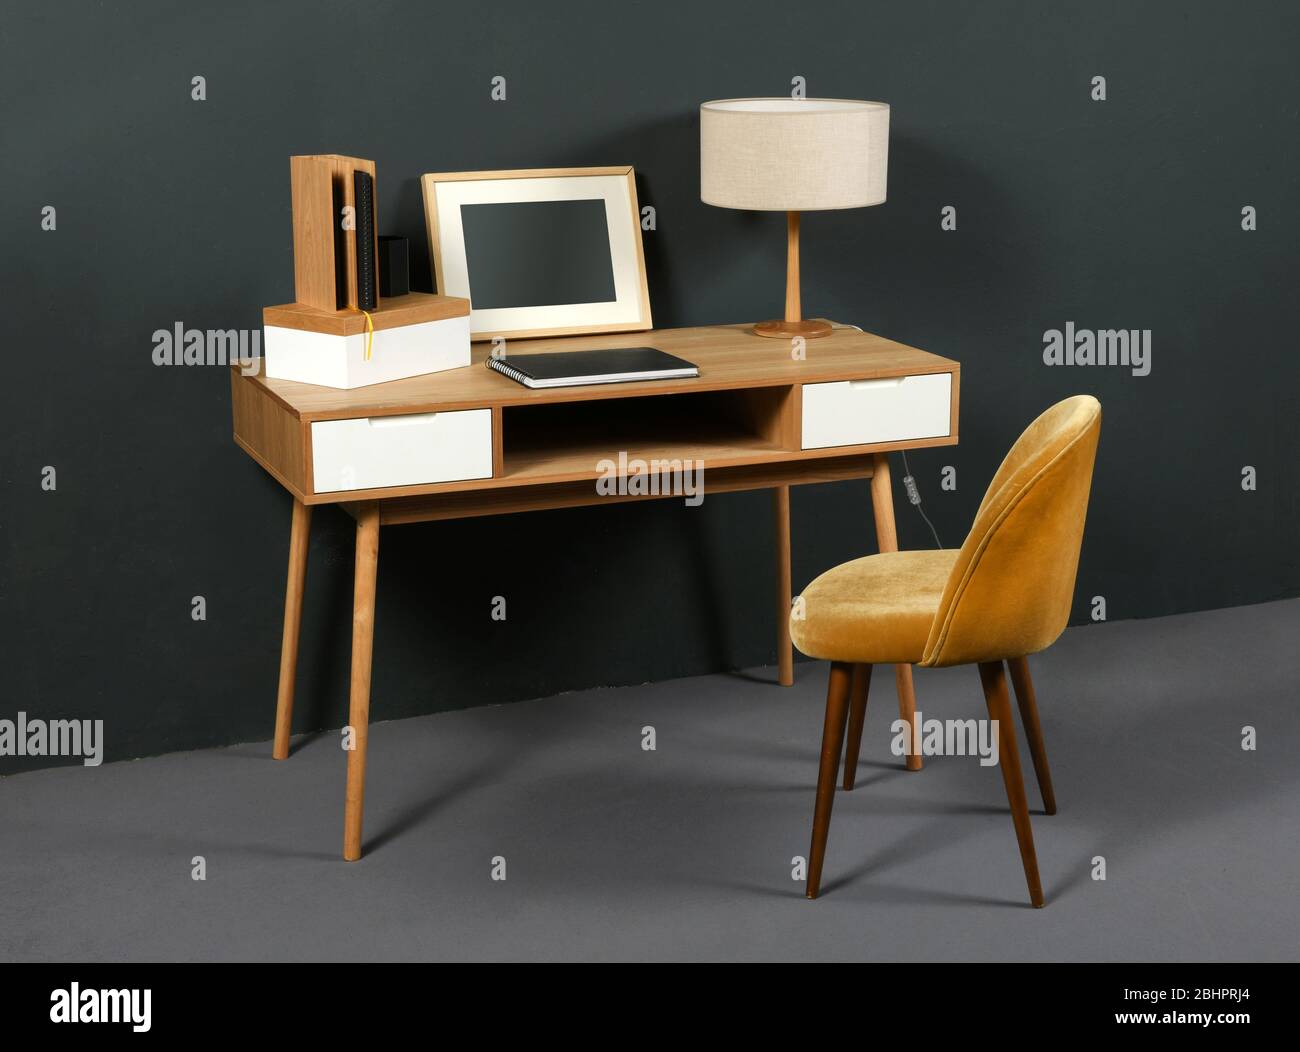 Old vintage wooden desk with retro table lamp, picture frame and easy chair in a room interior with grey decor Stock Photo